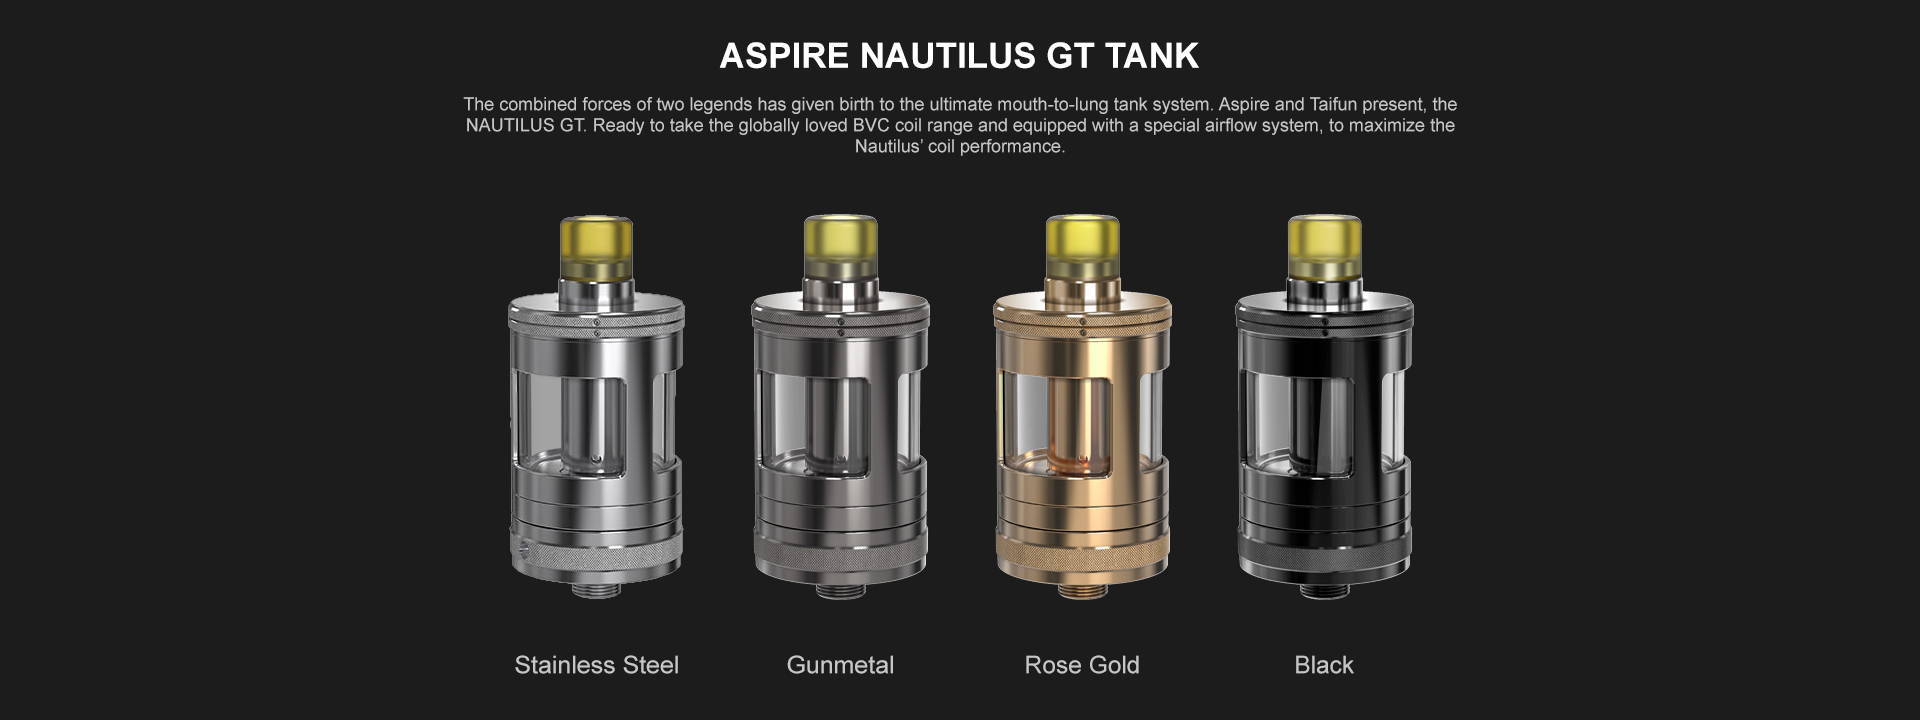 The combined forces of two legends have given birth to the ultimate mouth to lung tank system. Aspire and Taifun present the NAUTILUS GT. This tank is ready to take the globally loved BVC coil range and when equipped with a special airflow system, it maximises the Nautilus Coil's performance.